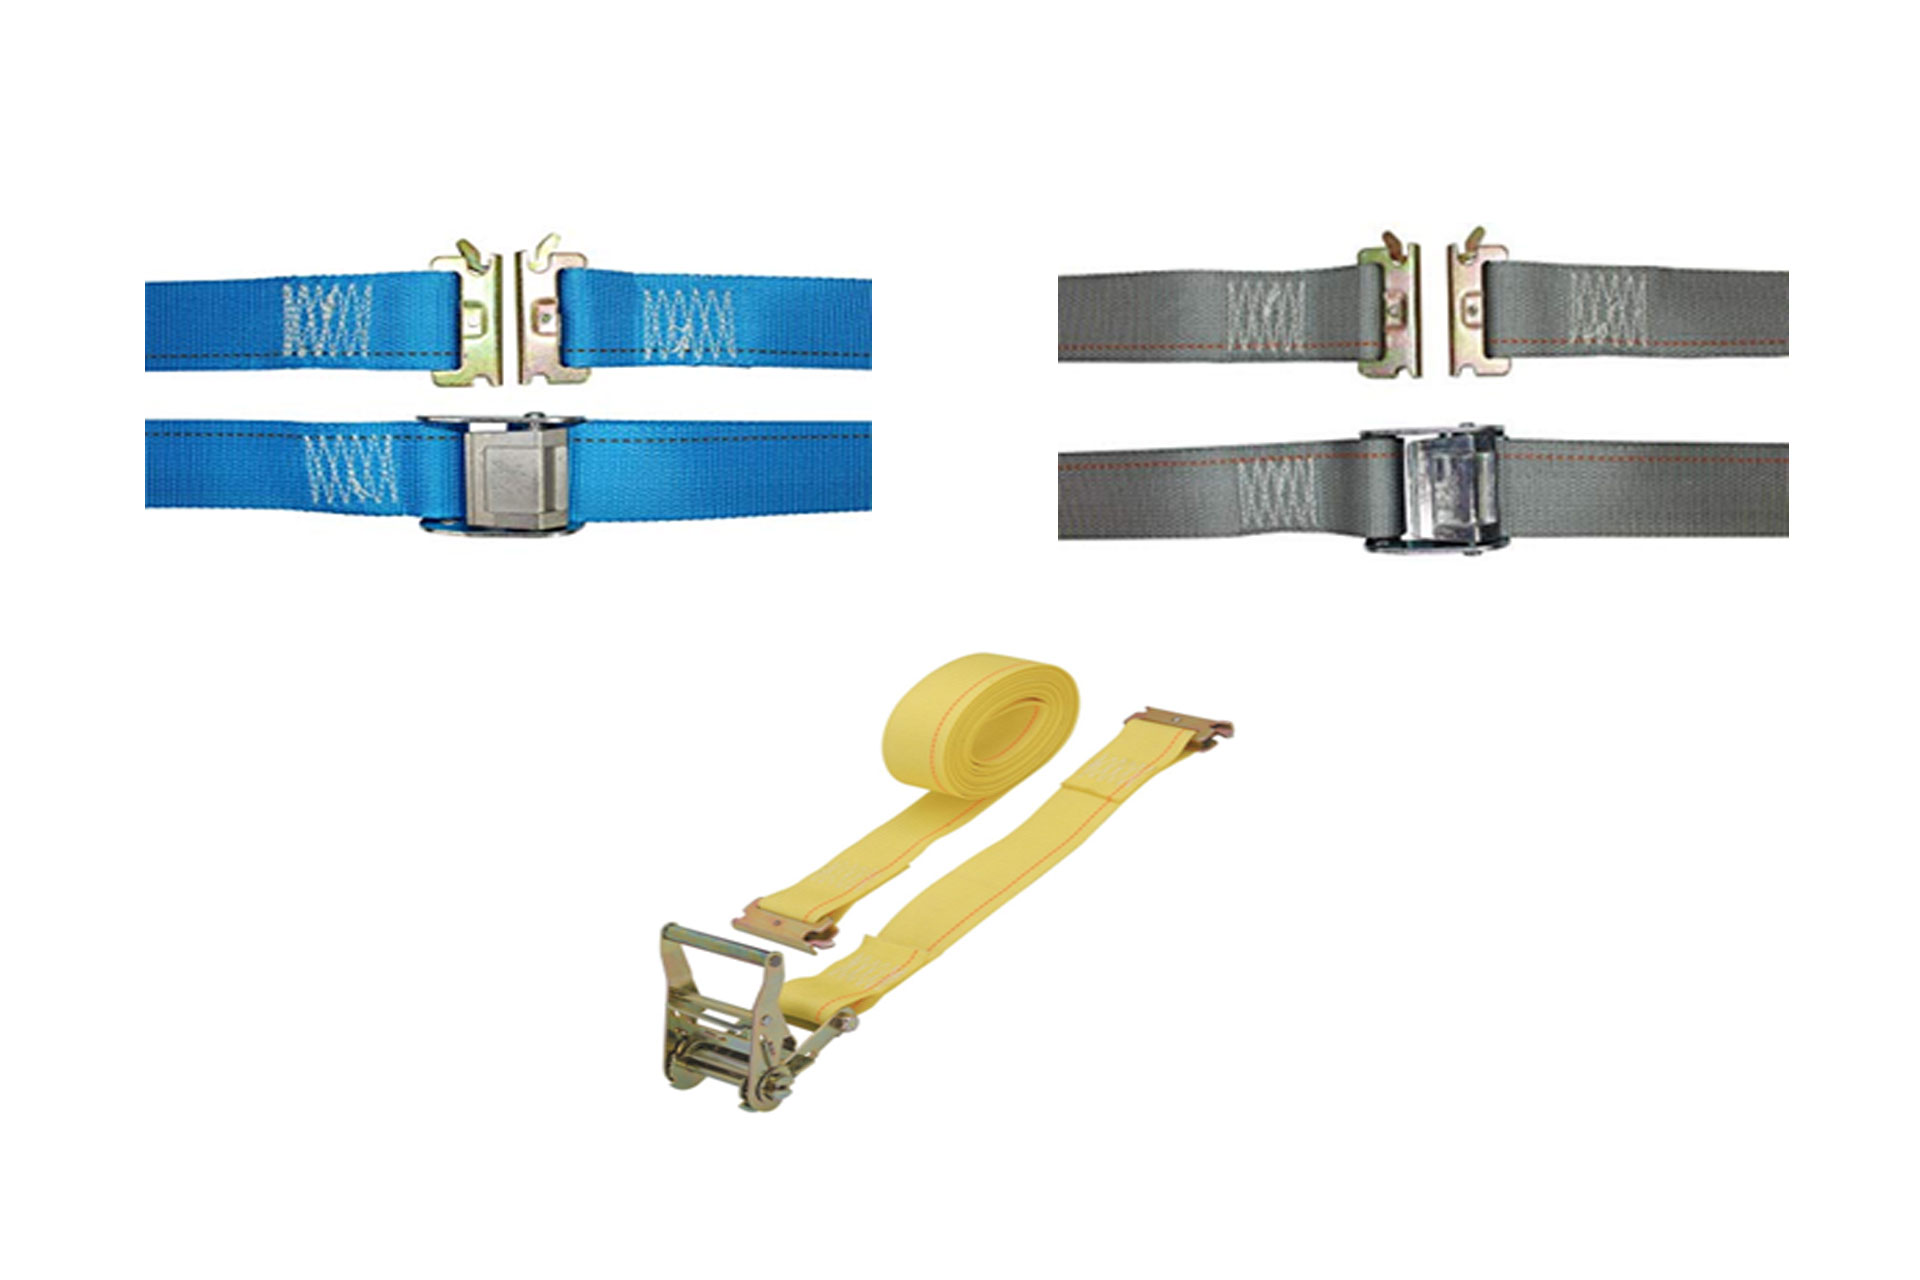 Series E Ratchet Buckle Straps with Spring End Fittings